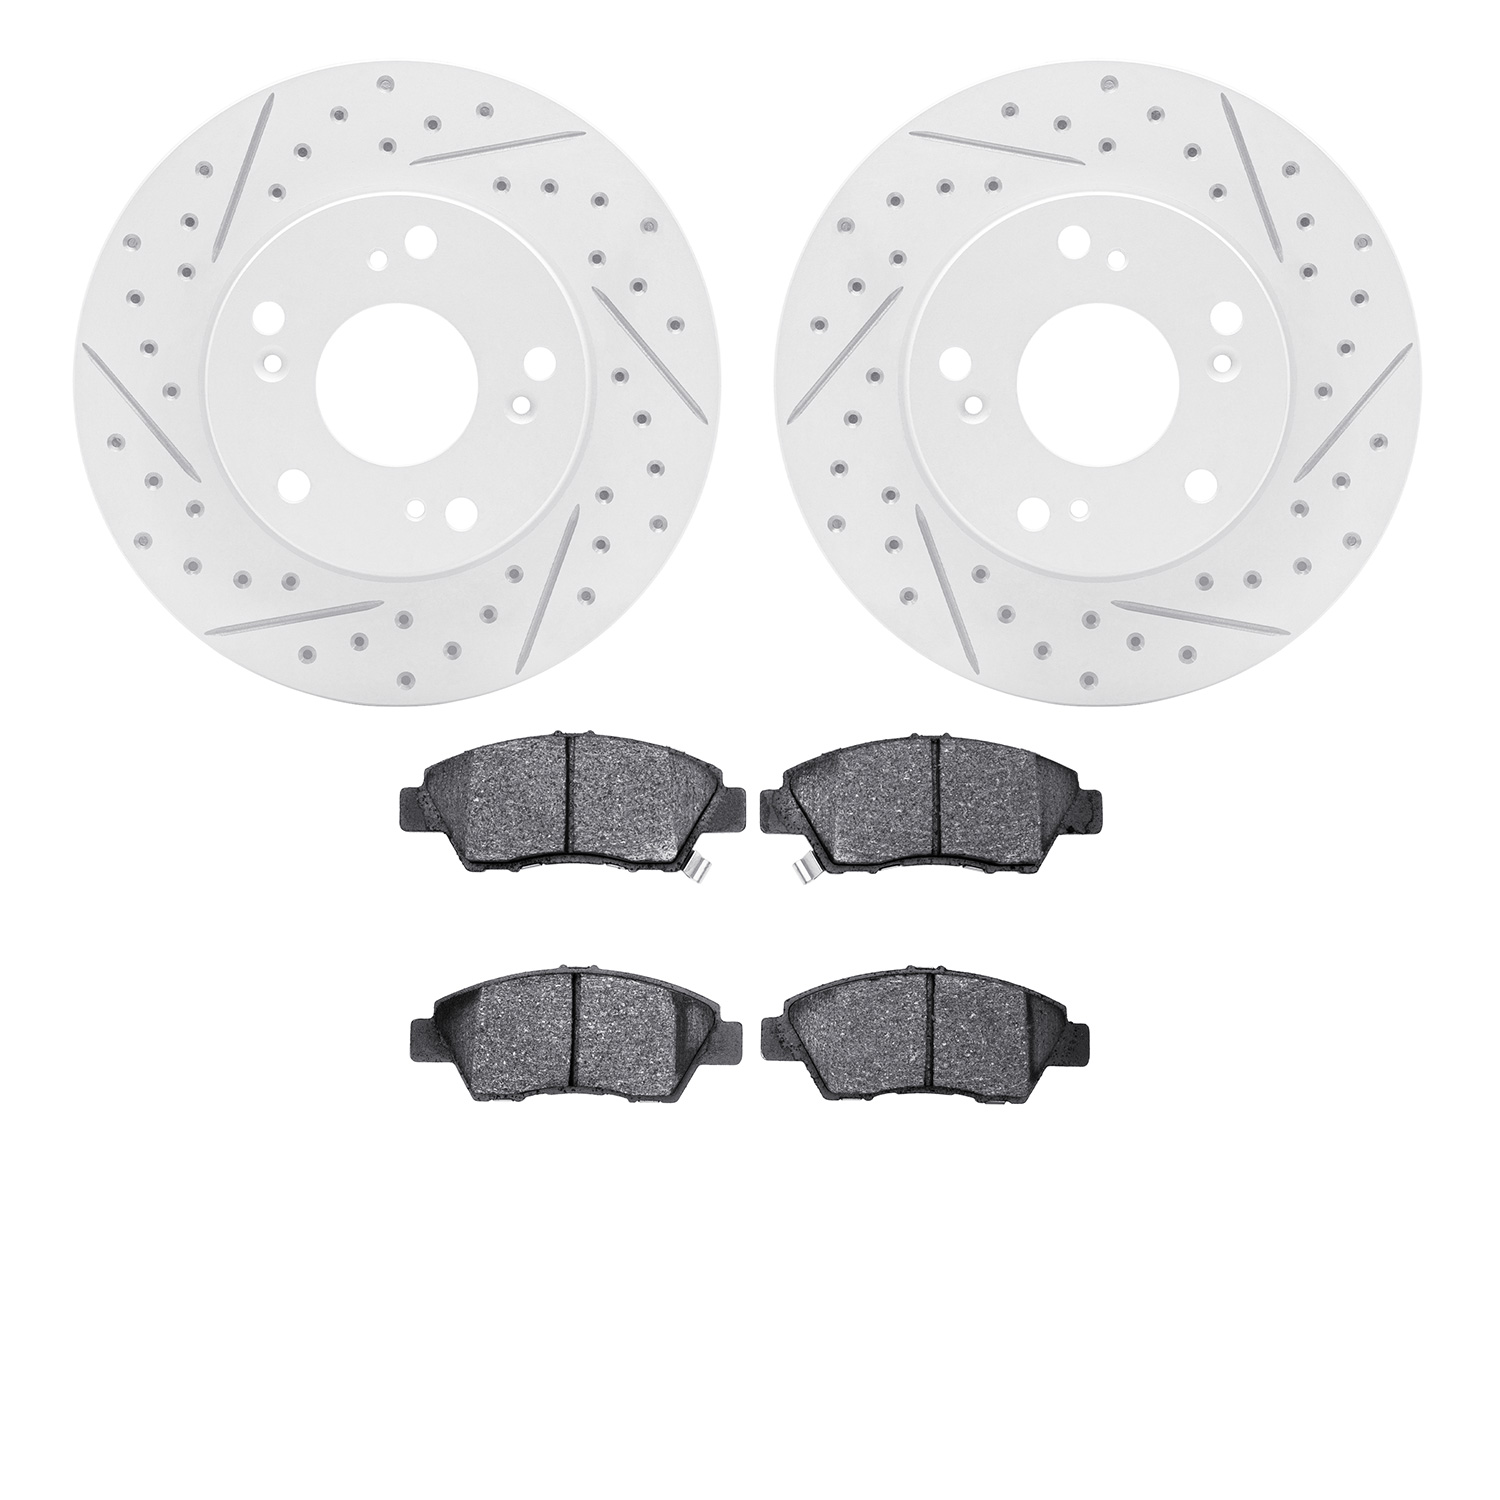 2502-59028 Geoperformance Drilled/Slotted Rotors w/5000 Advanced Brake Pads Kit, 2011-2015 Acura/Honda, Position: Front